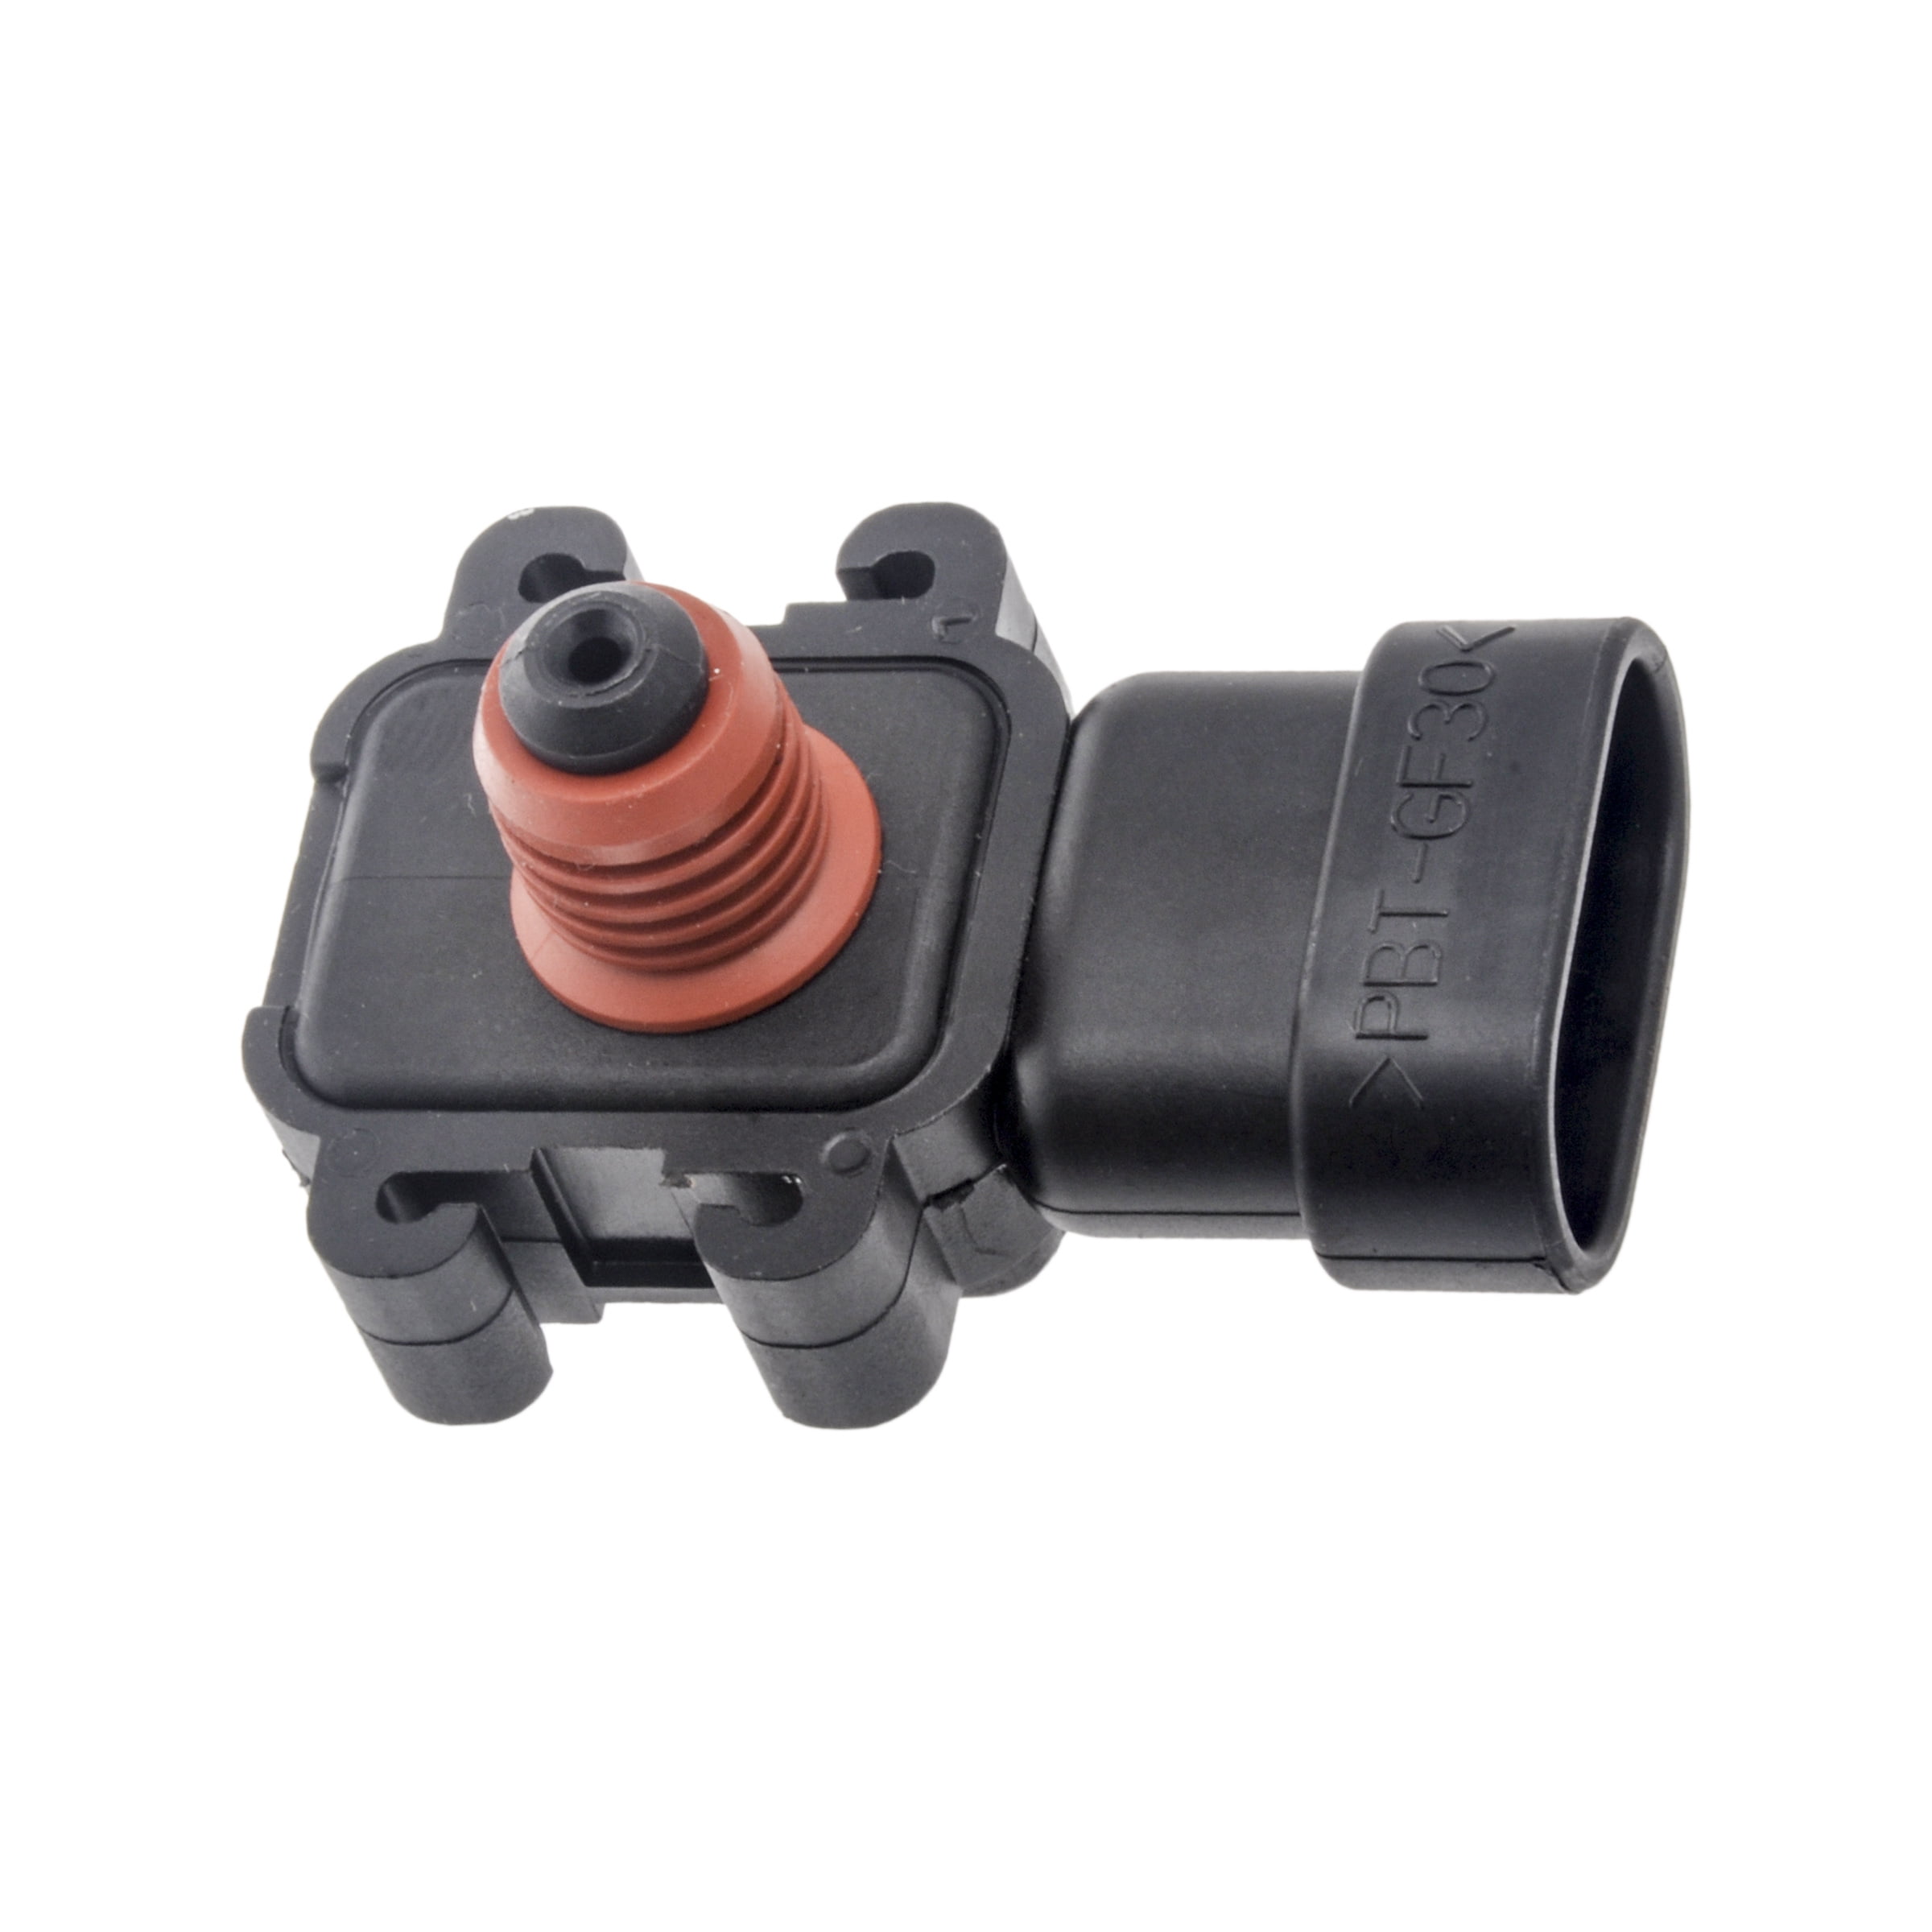 Aftermarket Manifold Absolute Pressure MAP Sensor 09359409 For Bui-ck Cadi-llac Chev-rolet G M C 